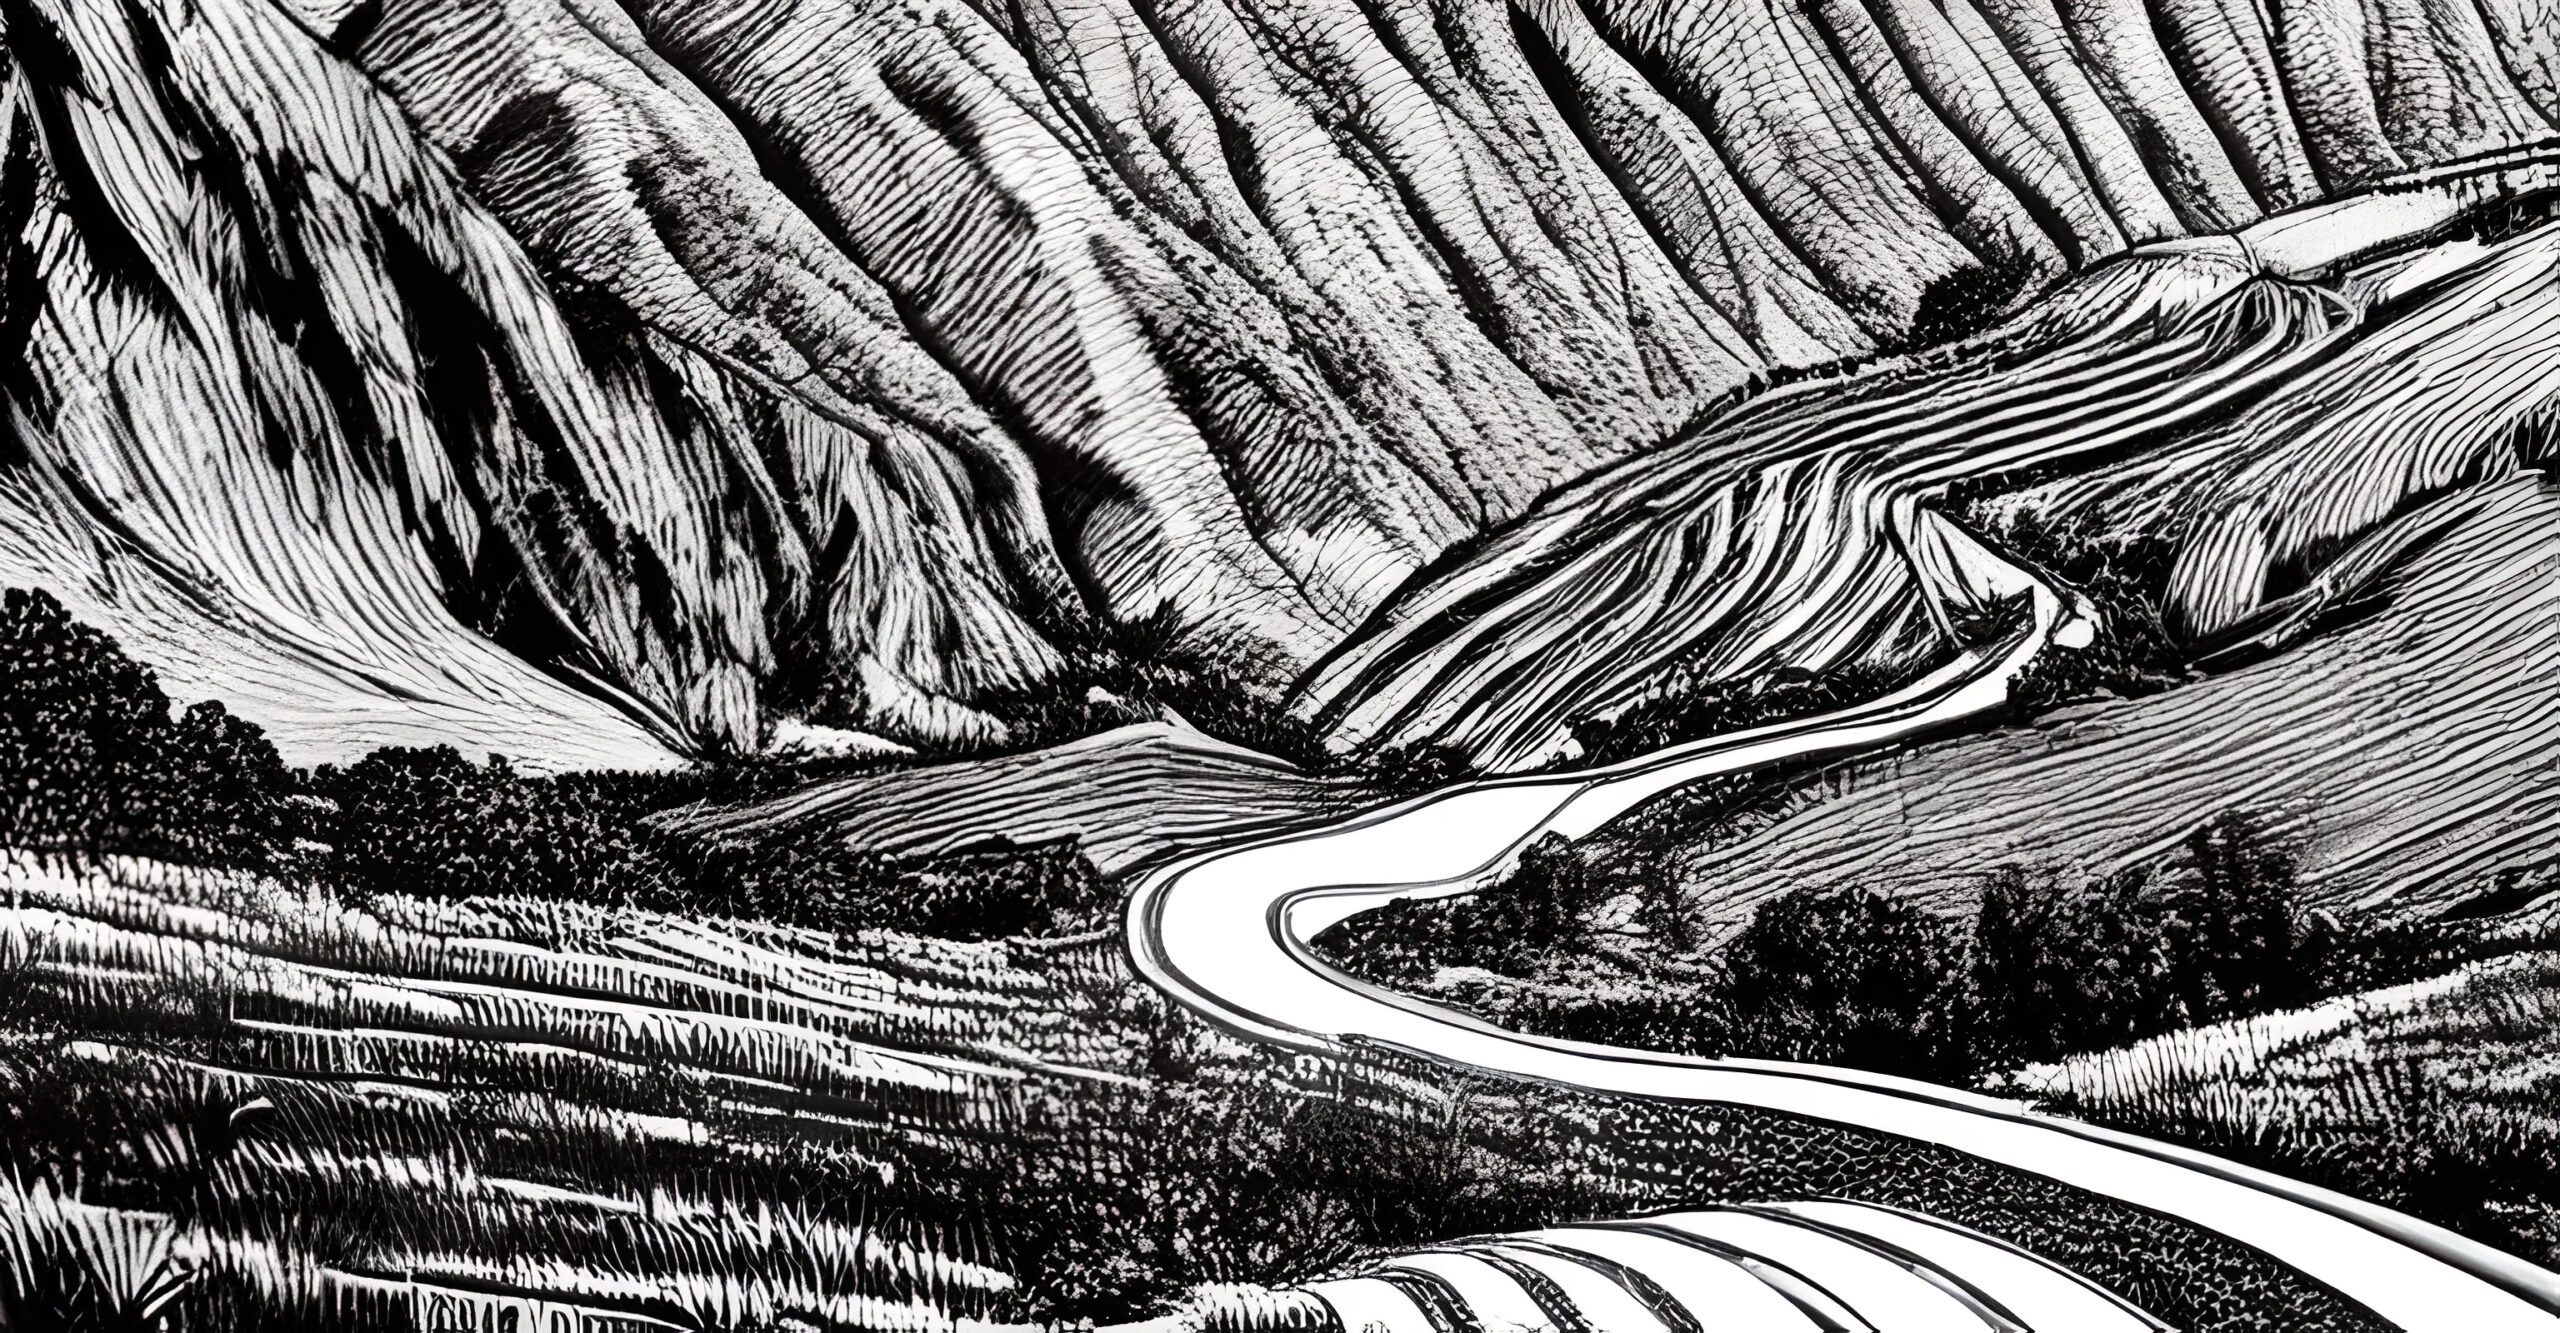 Woodcut of a long winding road through the mountains symbolizing a healing journey